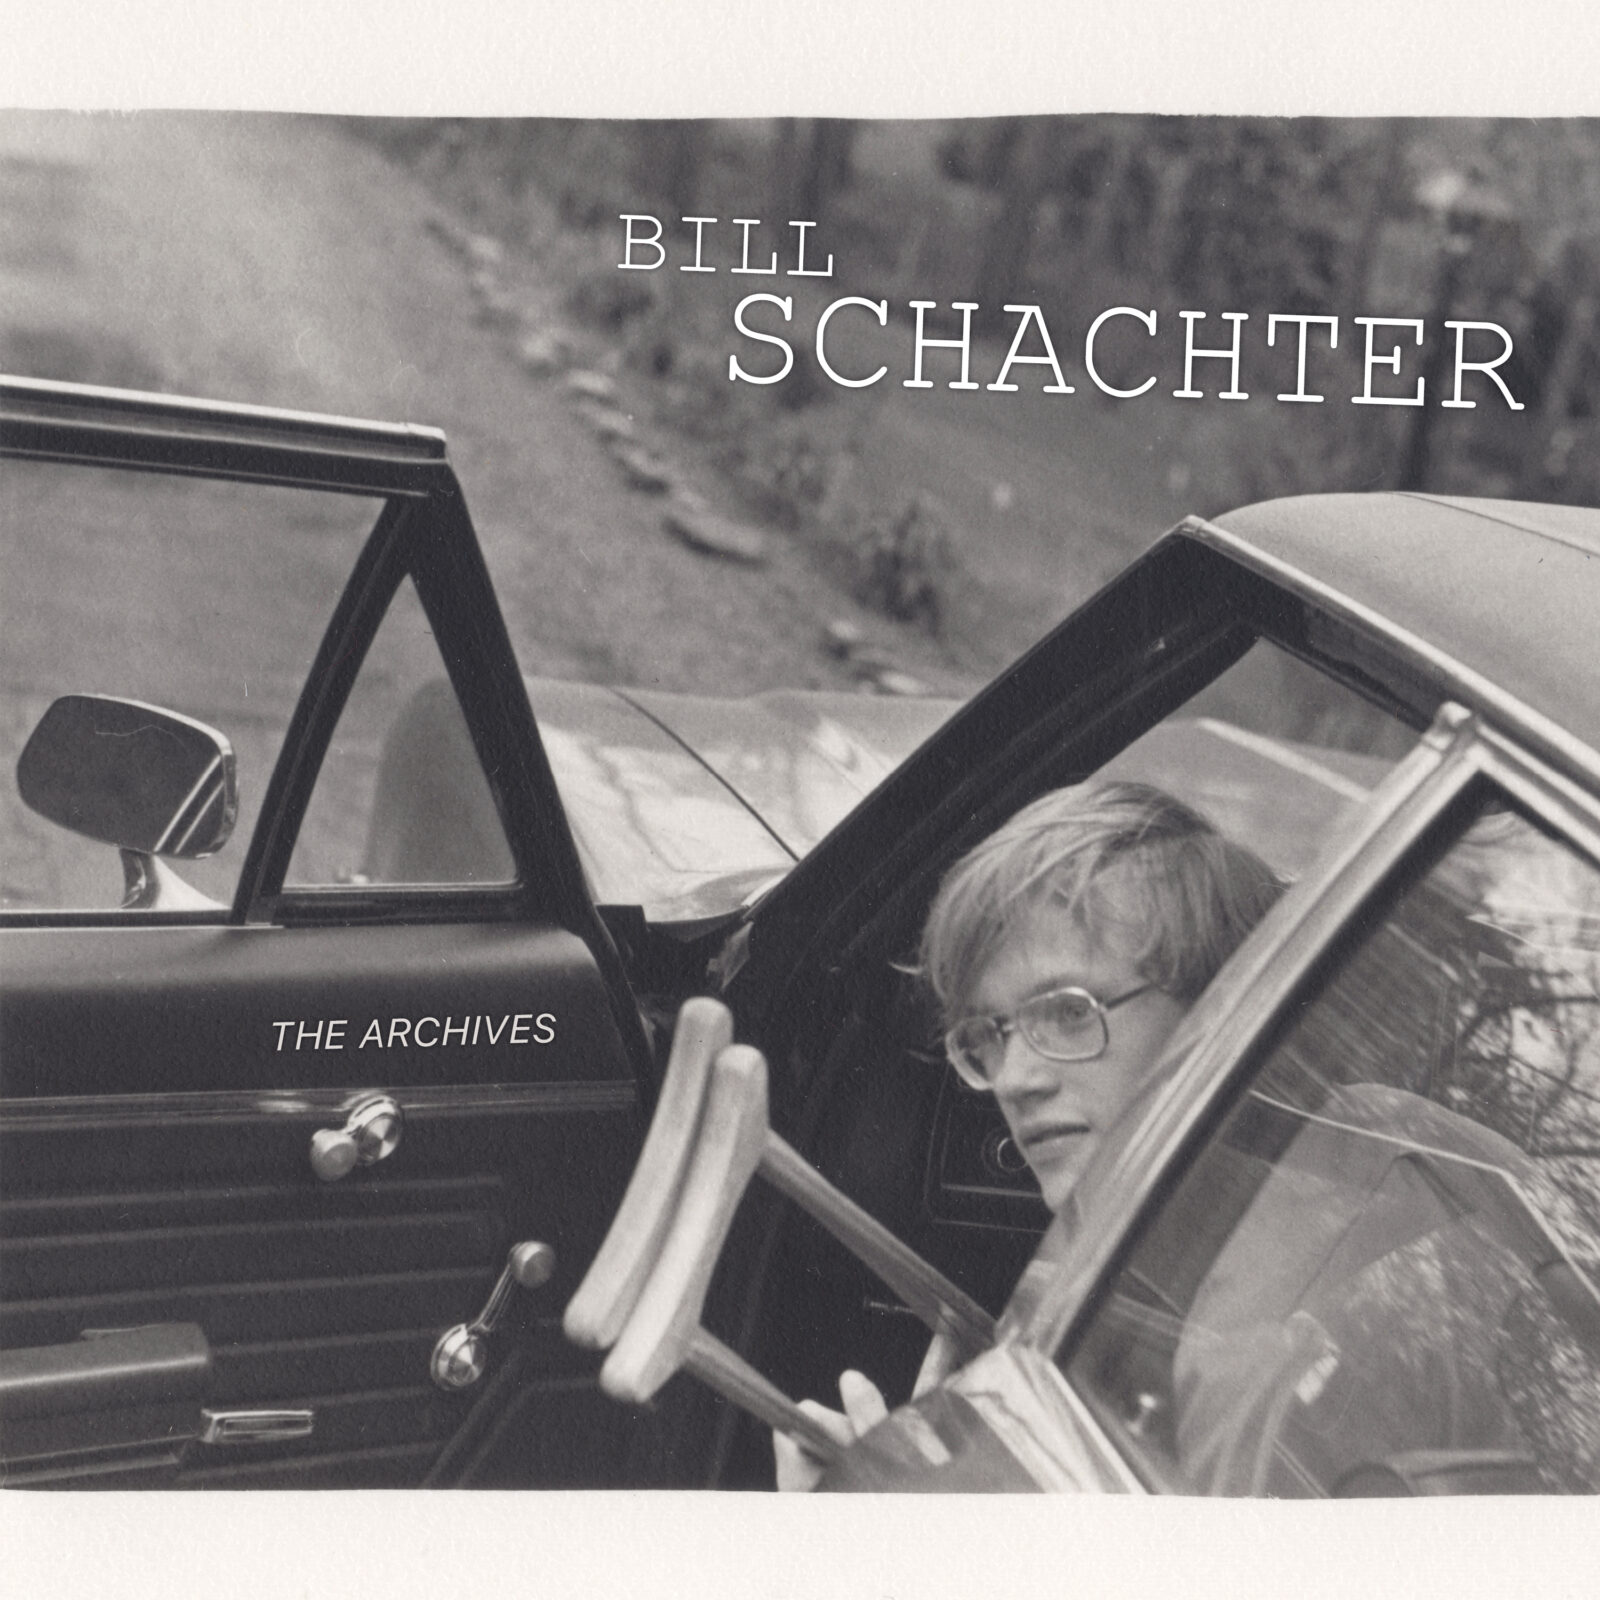 The Archives album cover